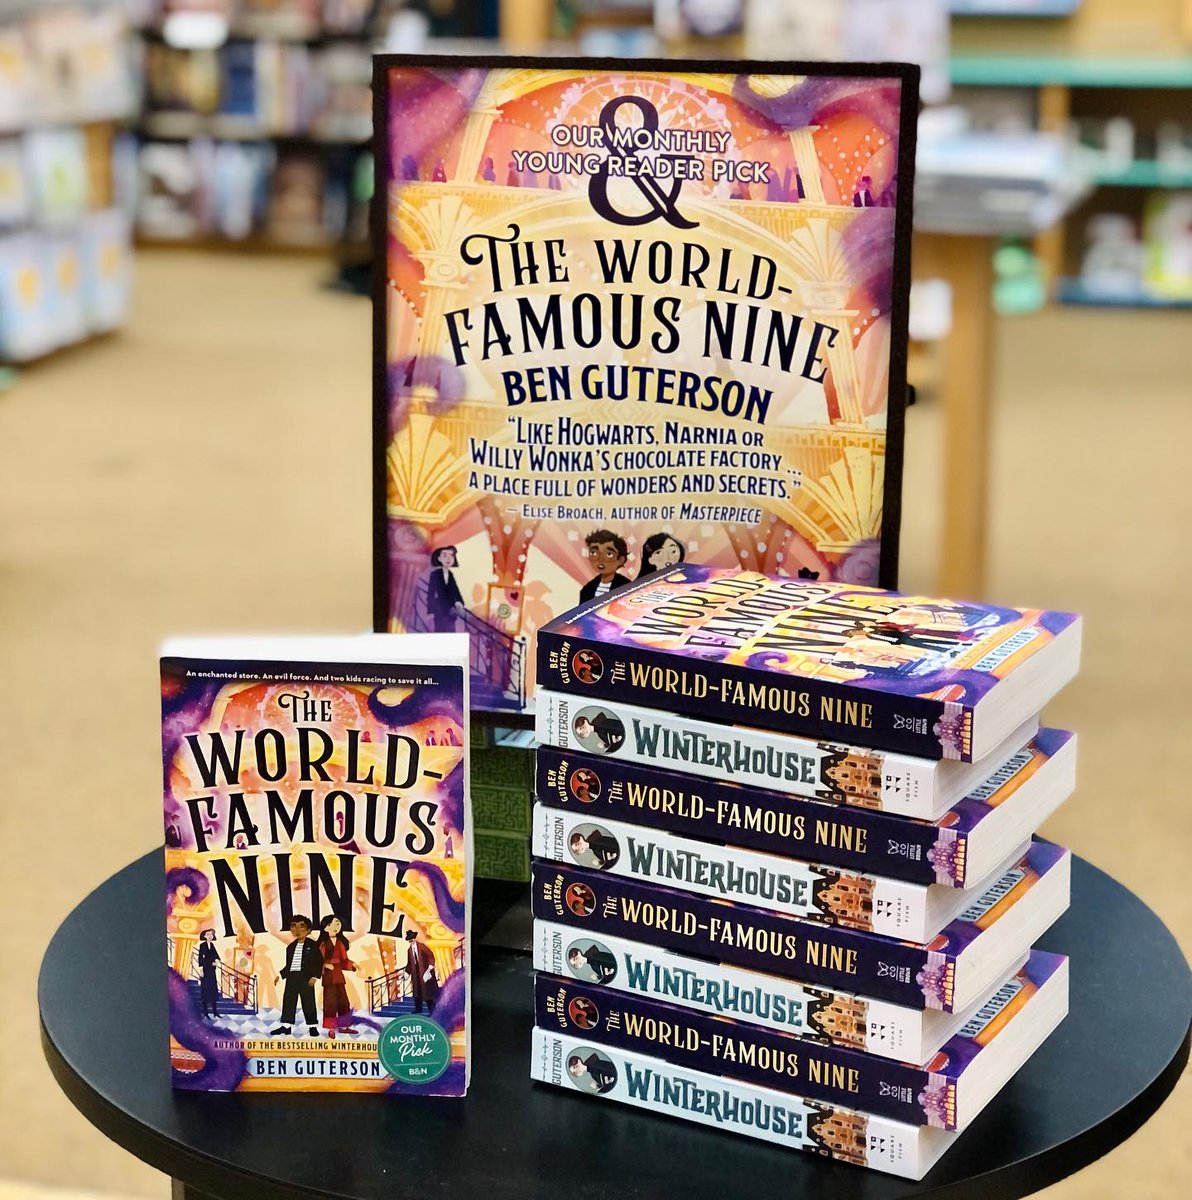 One final thx to Barnes and Noble. I was thrilled to have my latest, THE WORLD-FAMOUS NINE, selected as the B&N national 'Young Reader Pick of the Month' for February; & it was huge fun to visit B&N stores in the Pacific NW over the past few weeks. Thx, B&N, for the selection!